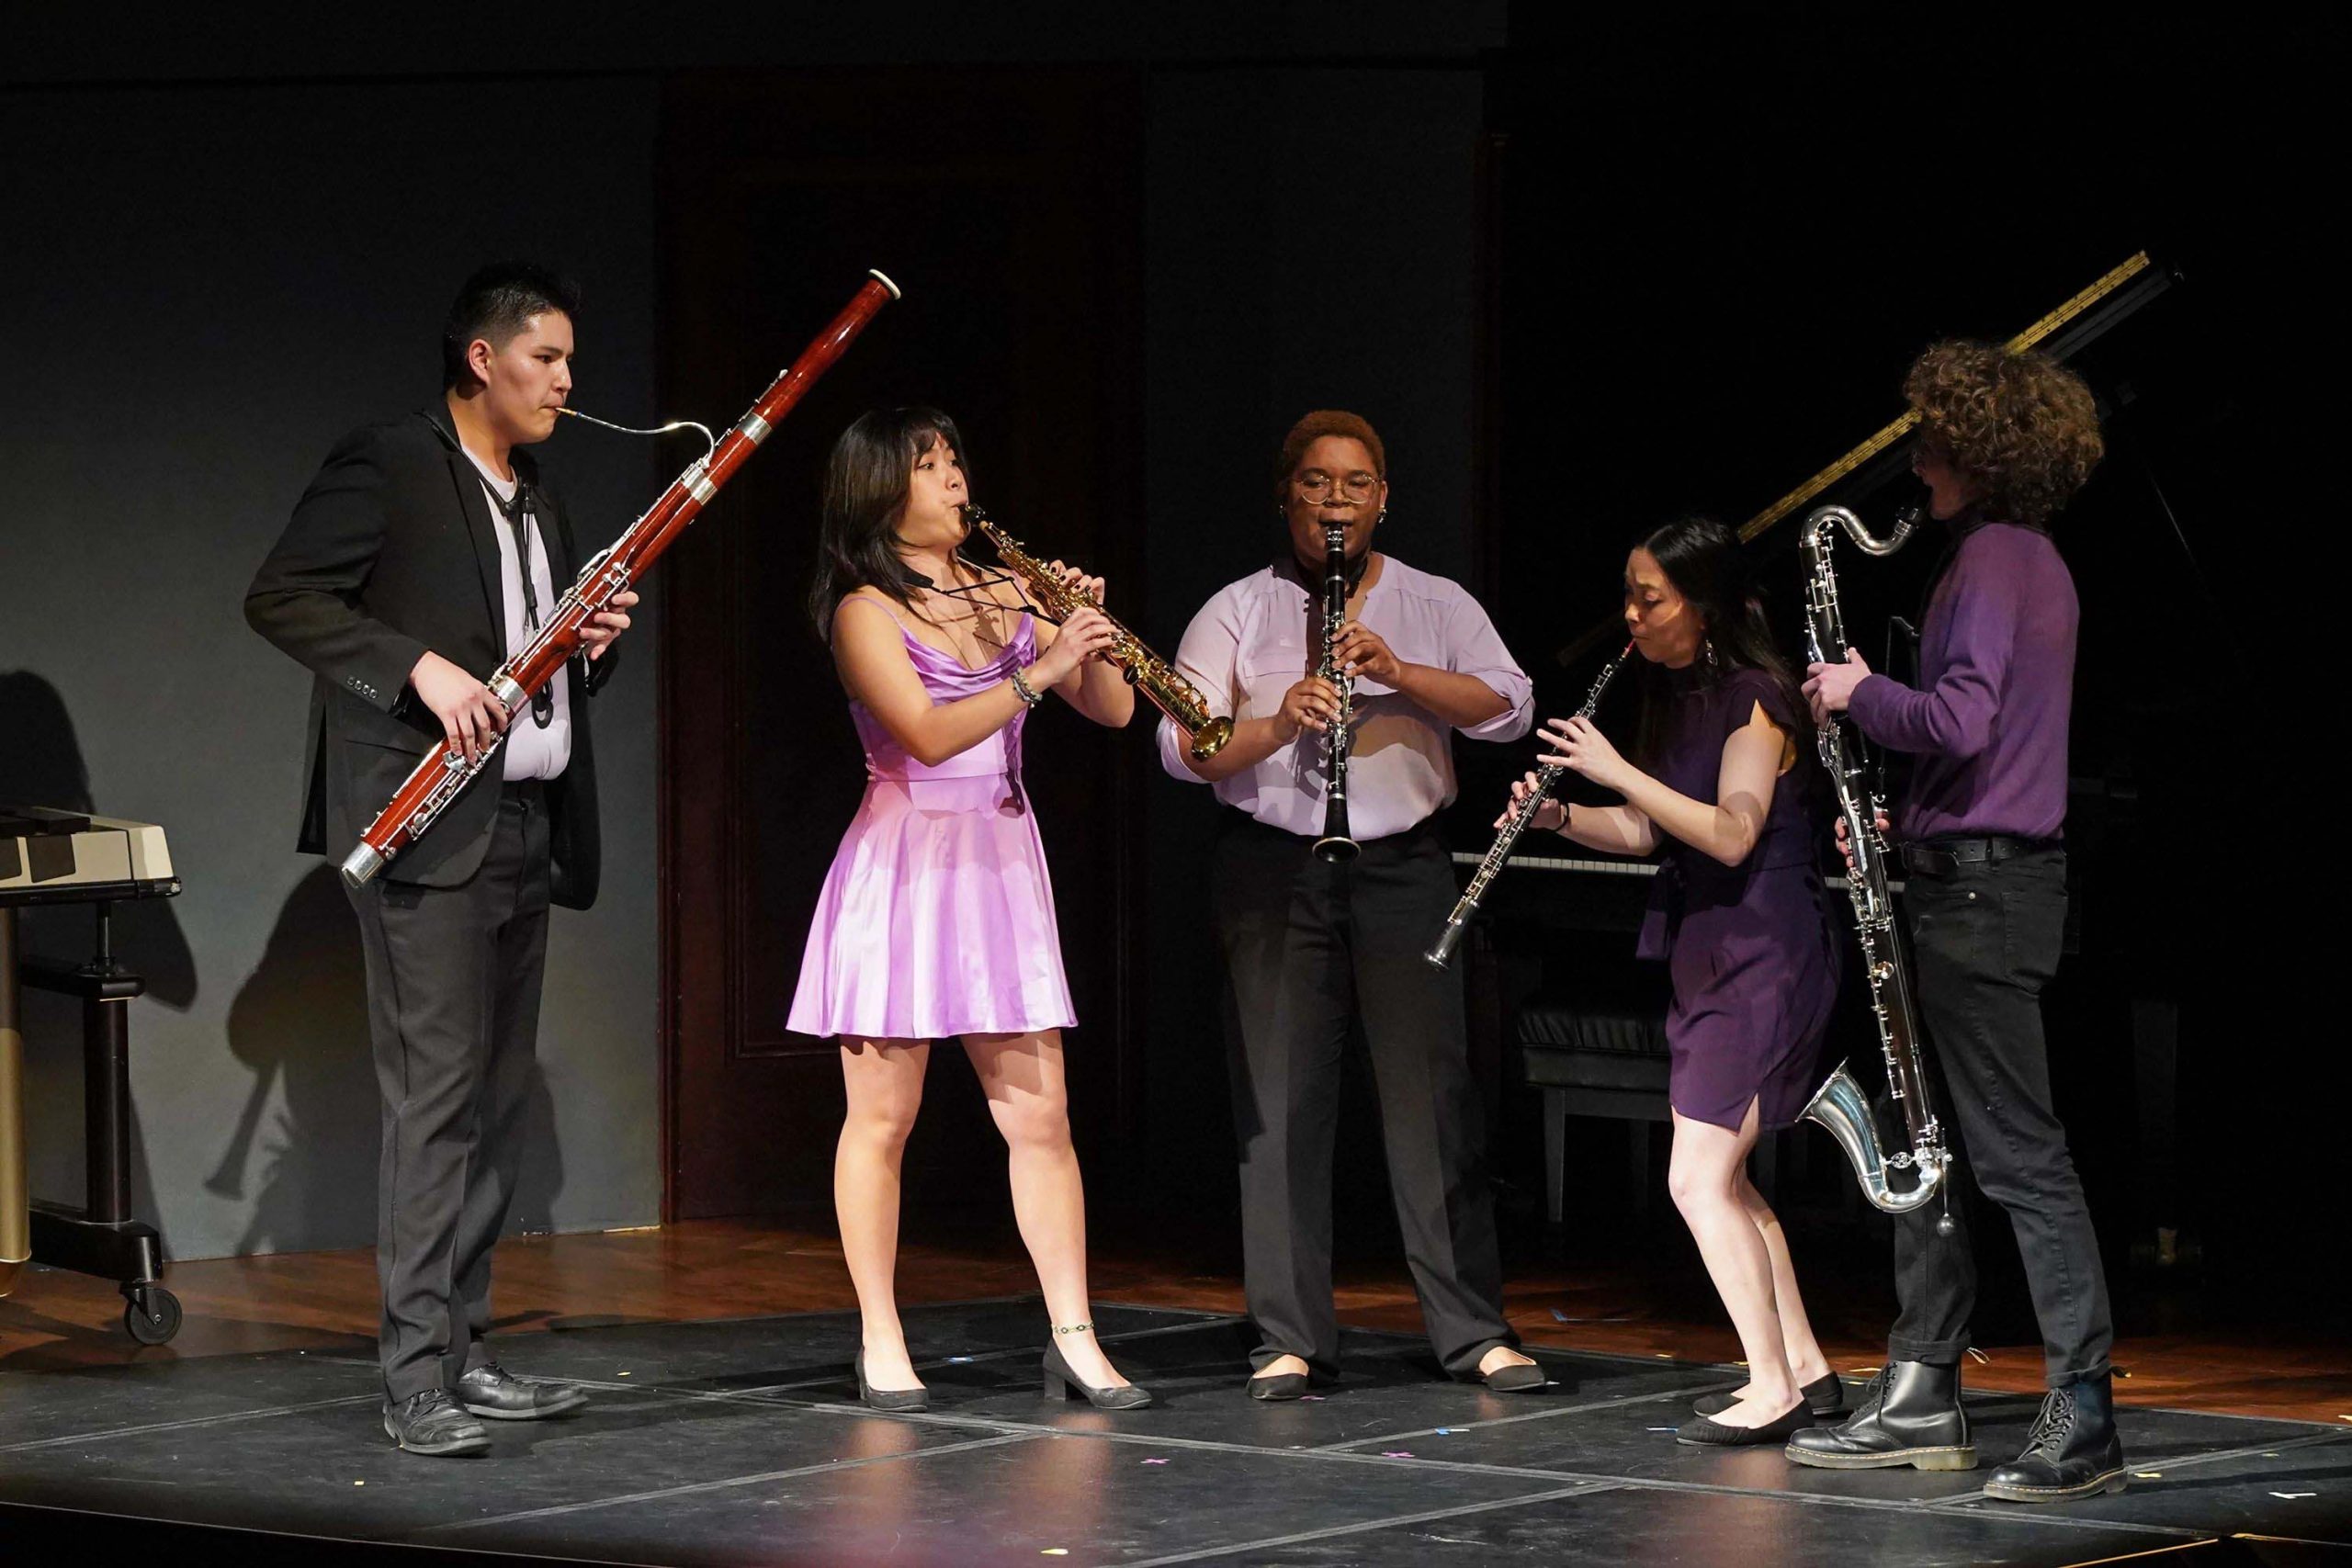 An ensemble of five wind players perform jazz music standing on stage